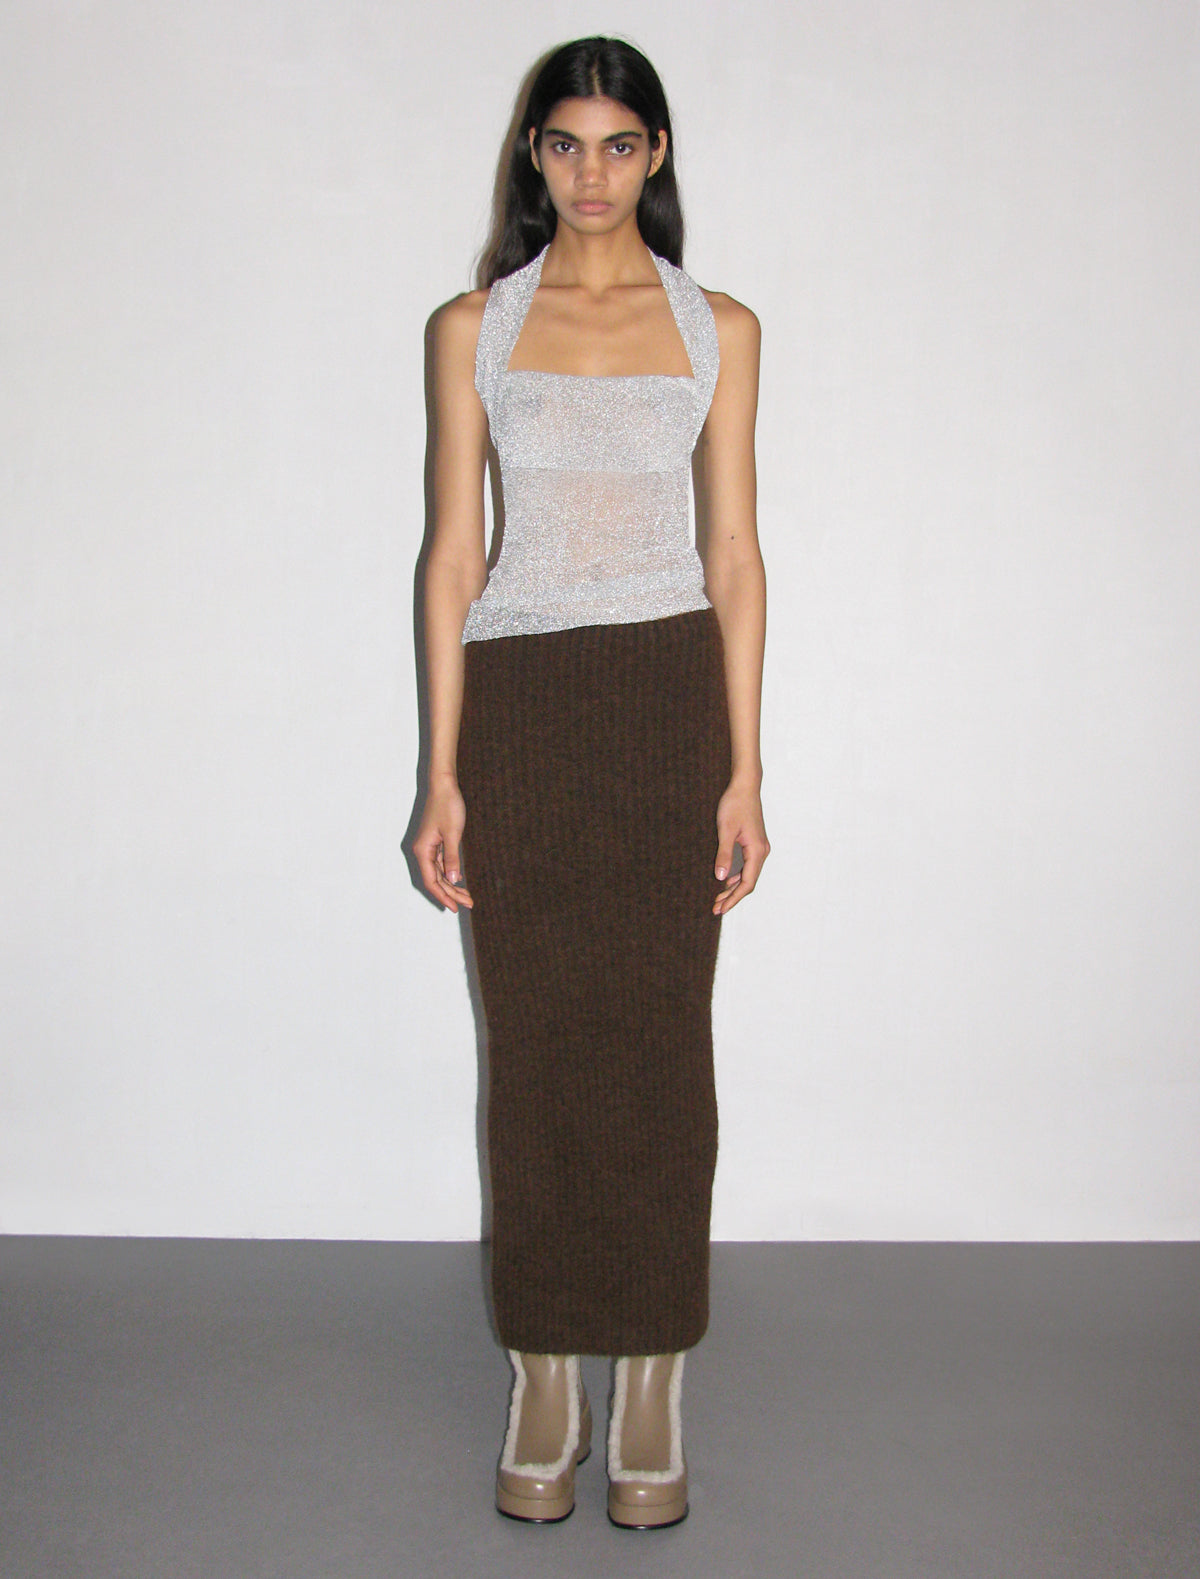 FLORA- Silver long knitted with sleeved neckline sheer, delicate boat top